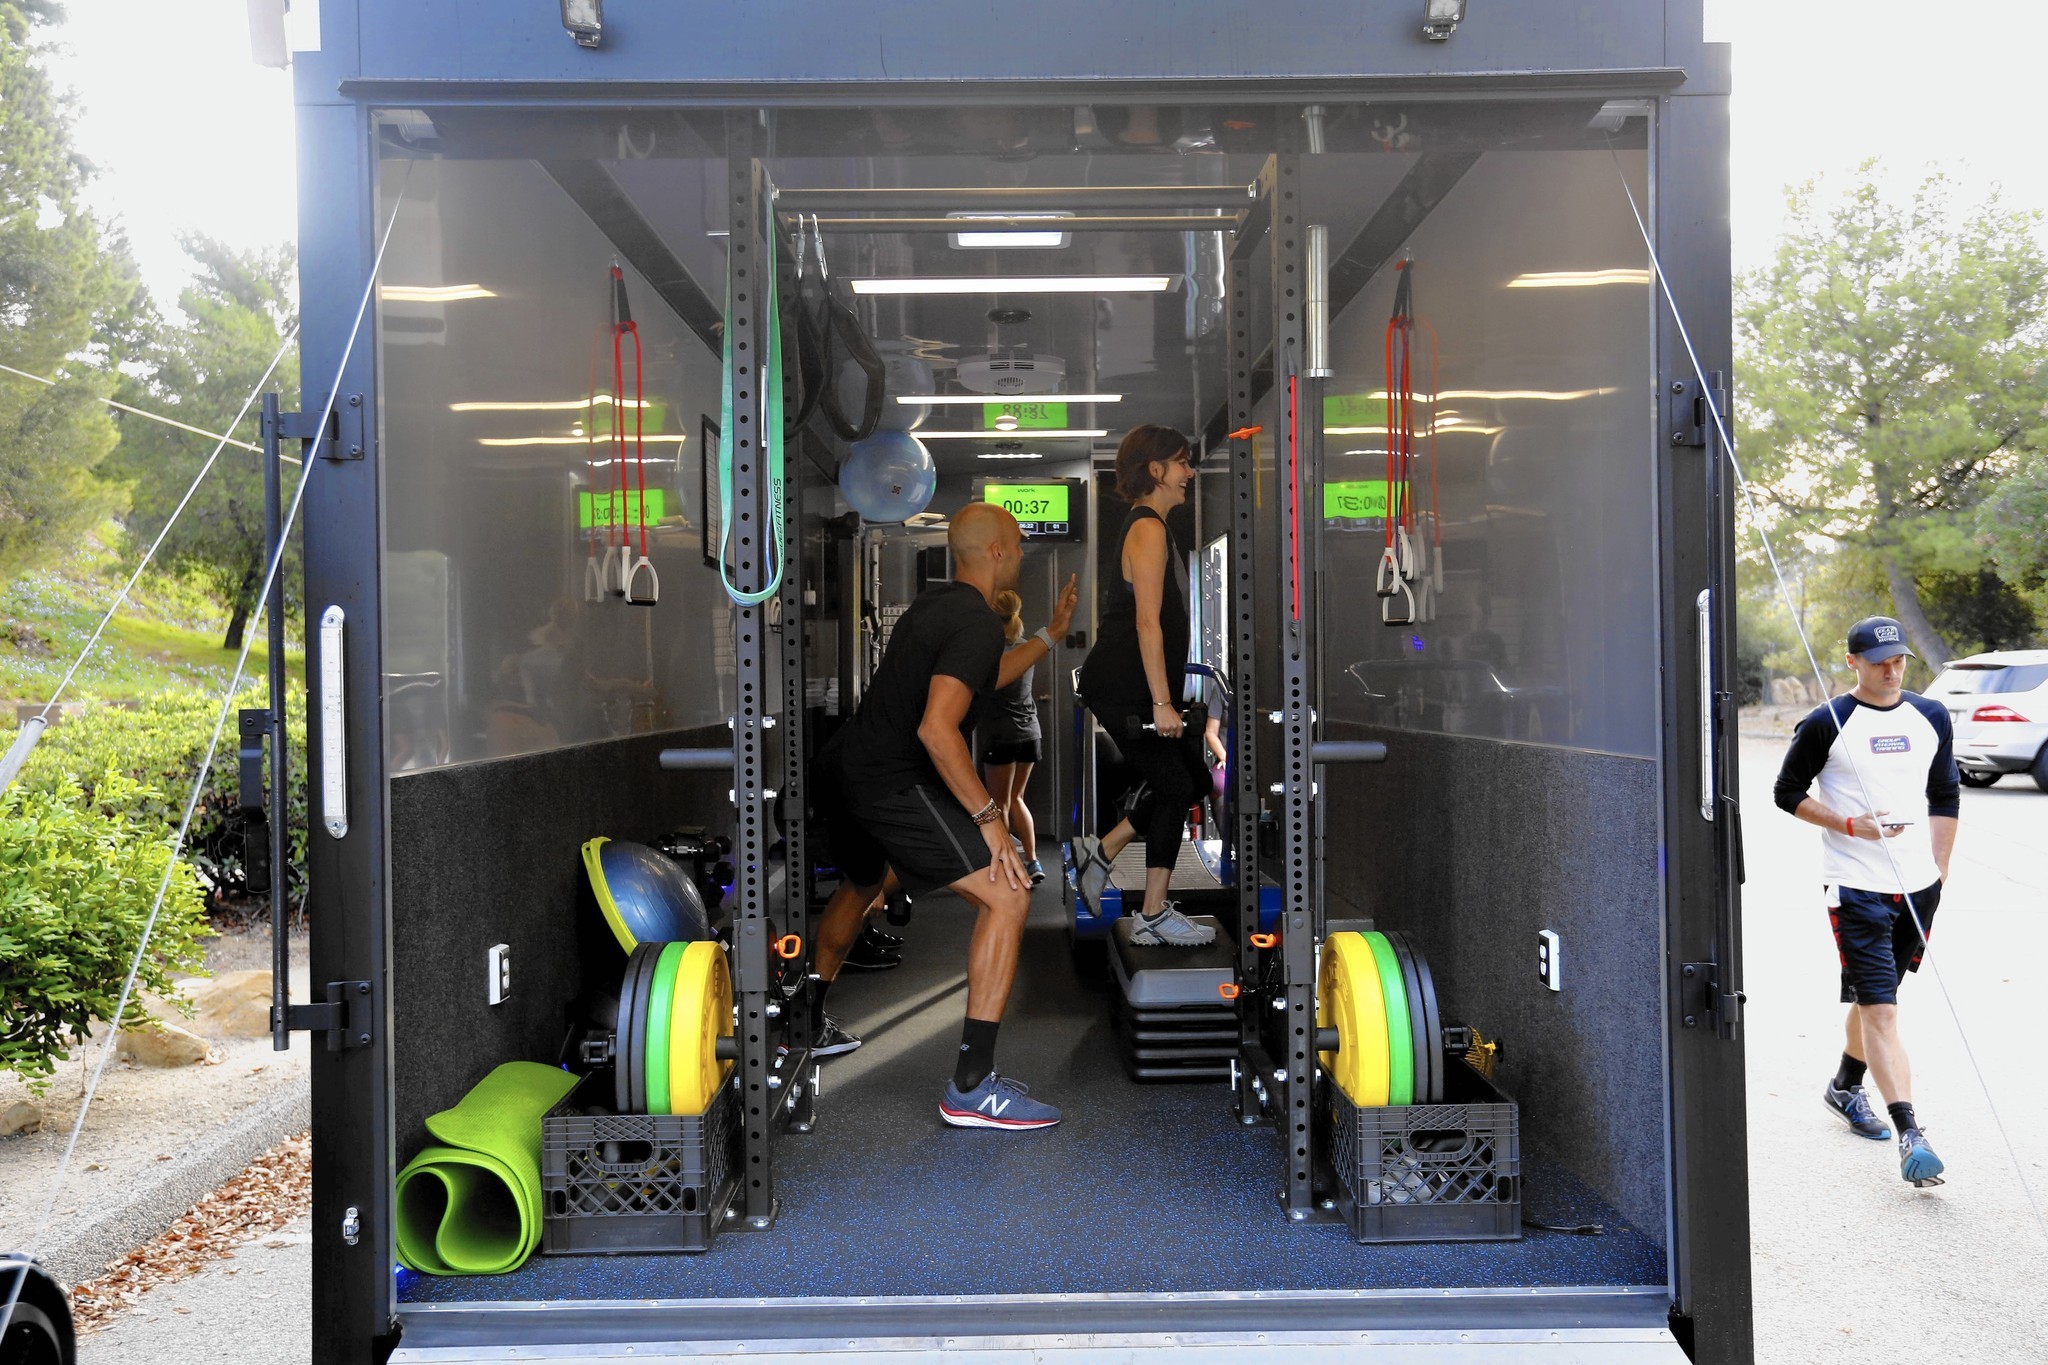 The gym comes to you with the rolling L.A. workout studio G.I.T. Fit